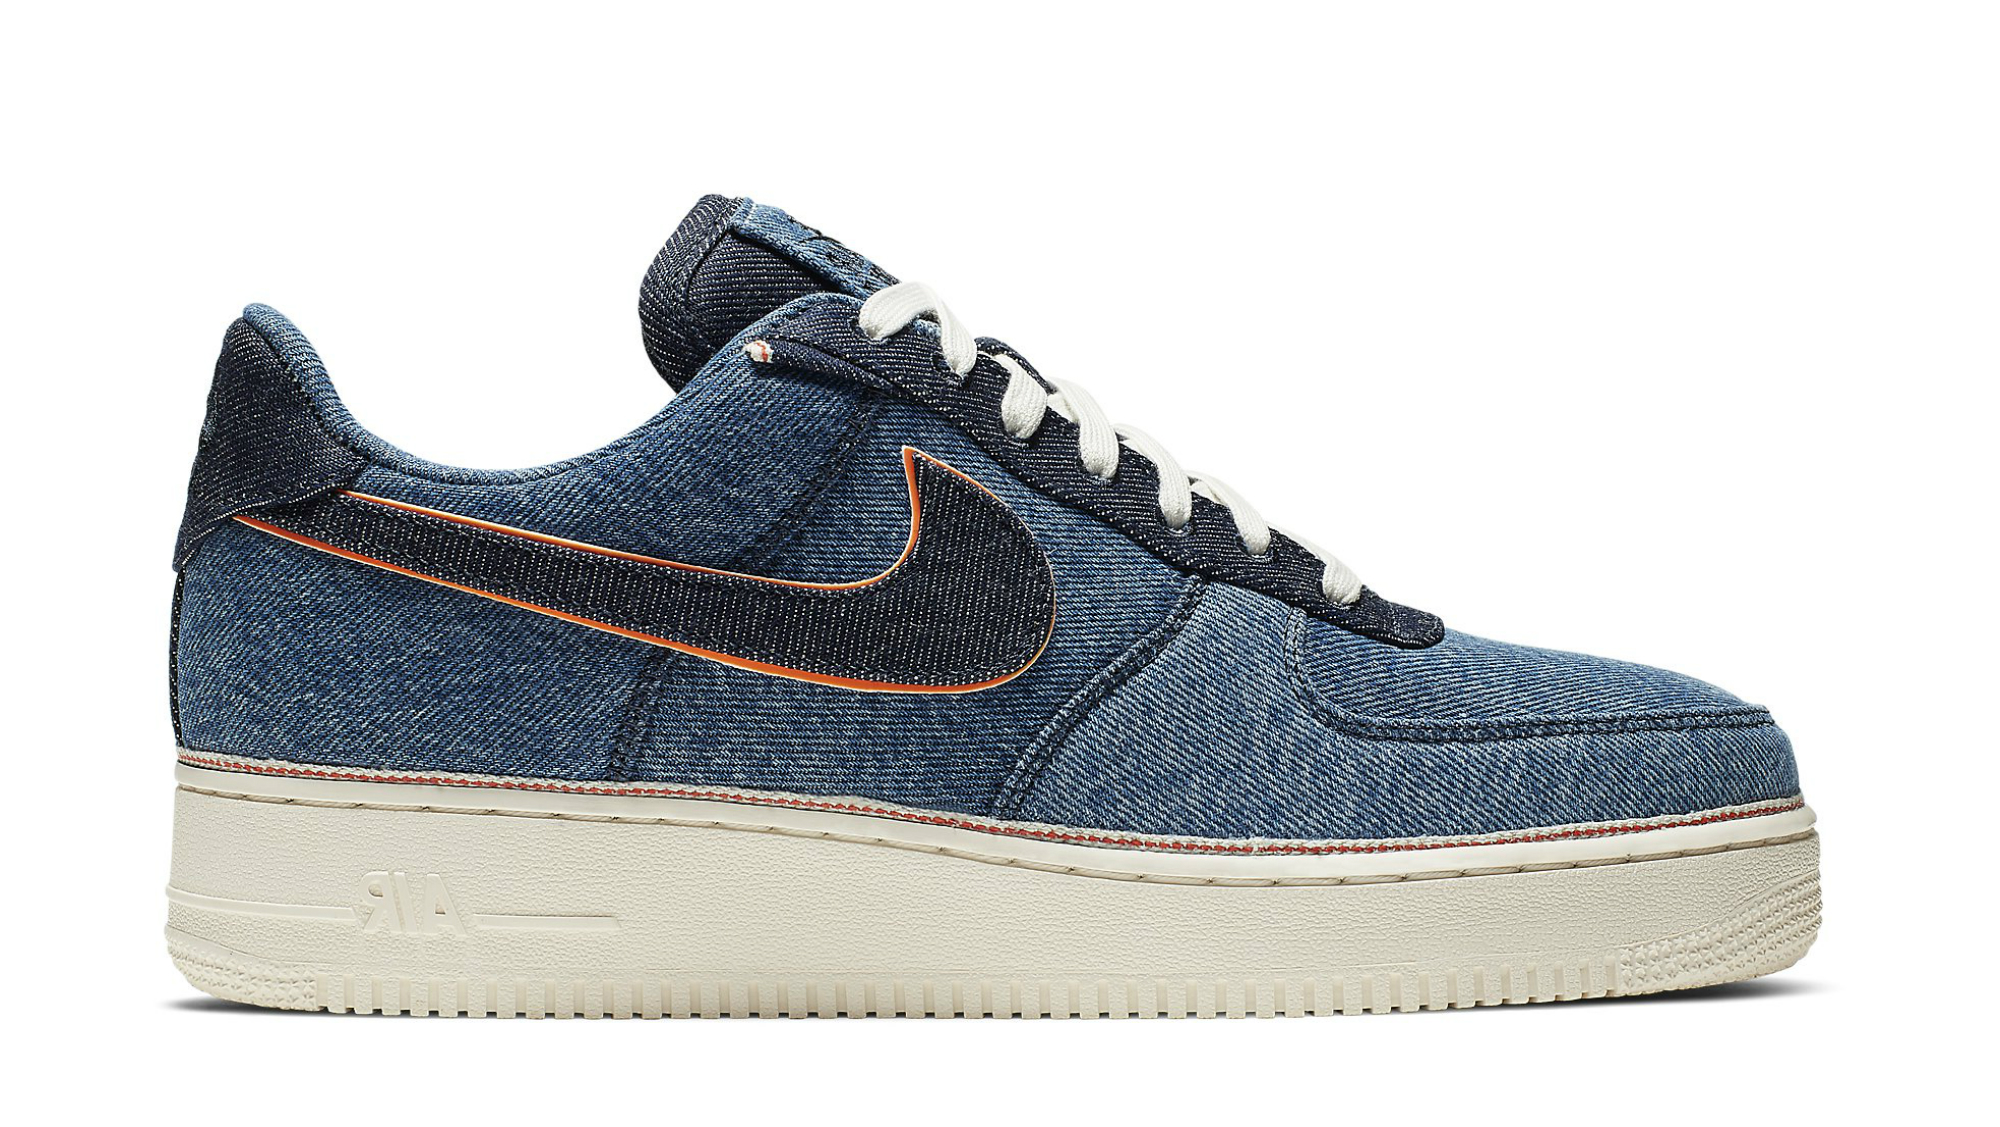 3x1 nike air force 1 low stonewash blue 905345 403 release date